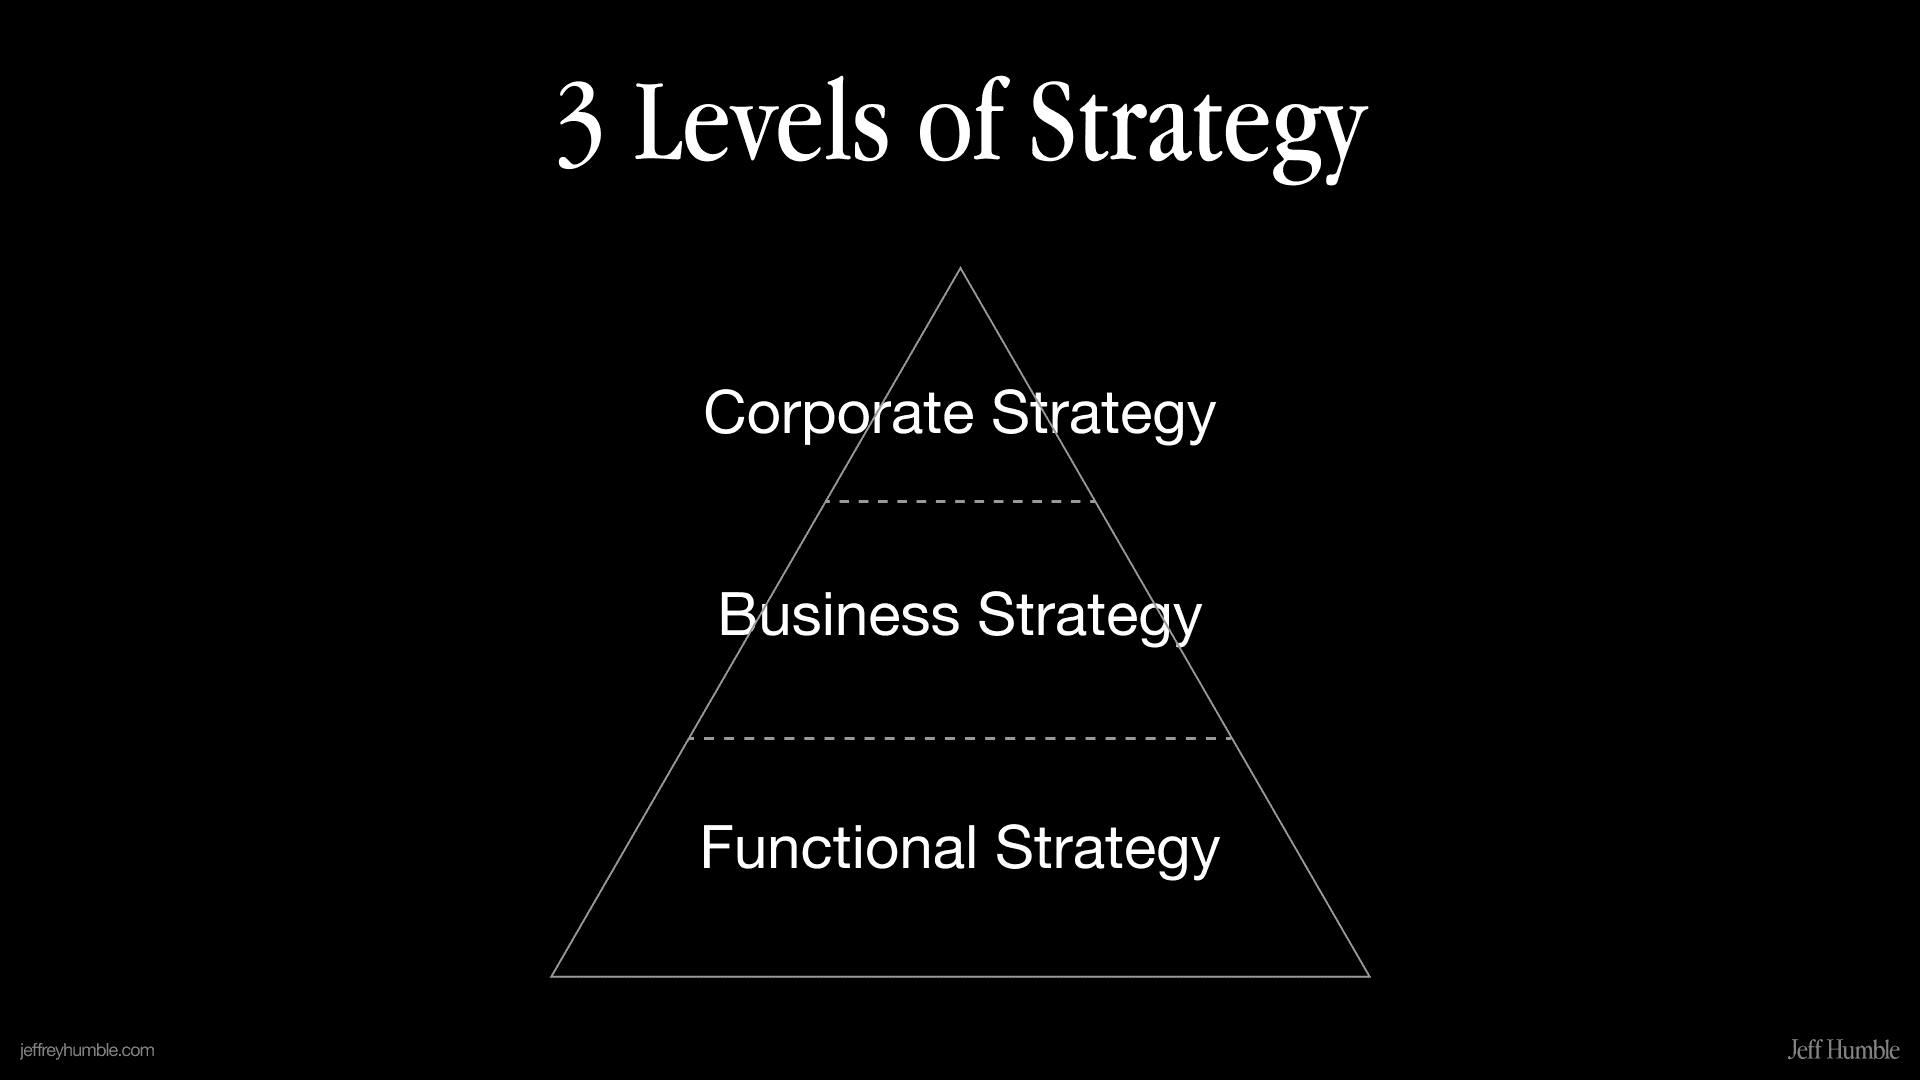 3 levels of strategy